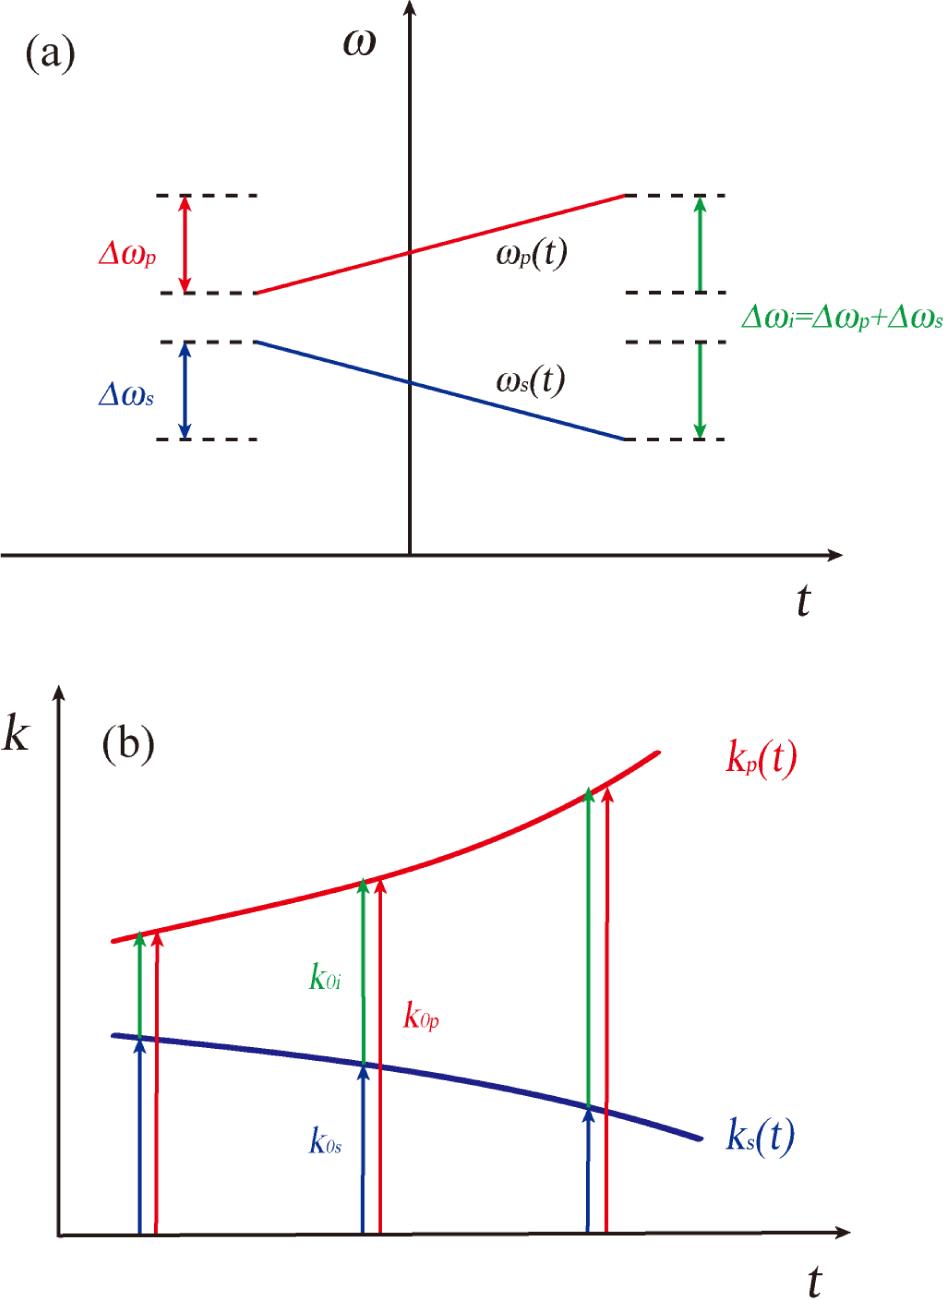 (a) Instantaneous angular frequencies and the bandwidth of each interacting wave (, , ) of the oppositely dual-chirped DFG scheme; (b) sketch of the ideal broadband PM condition.